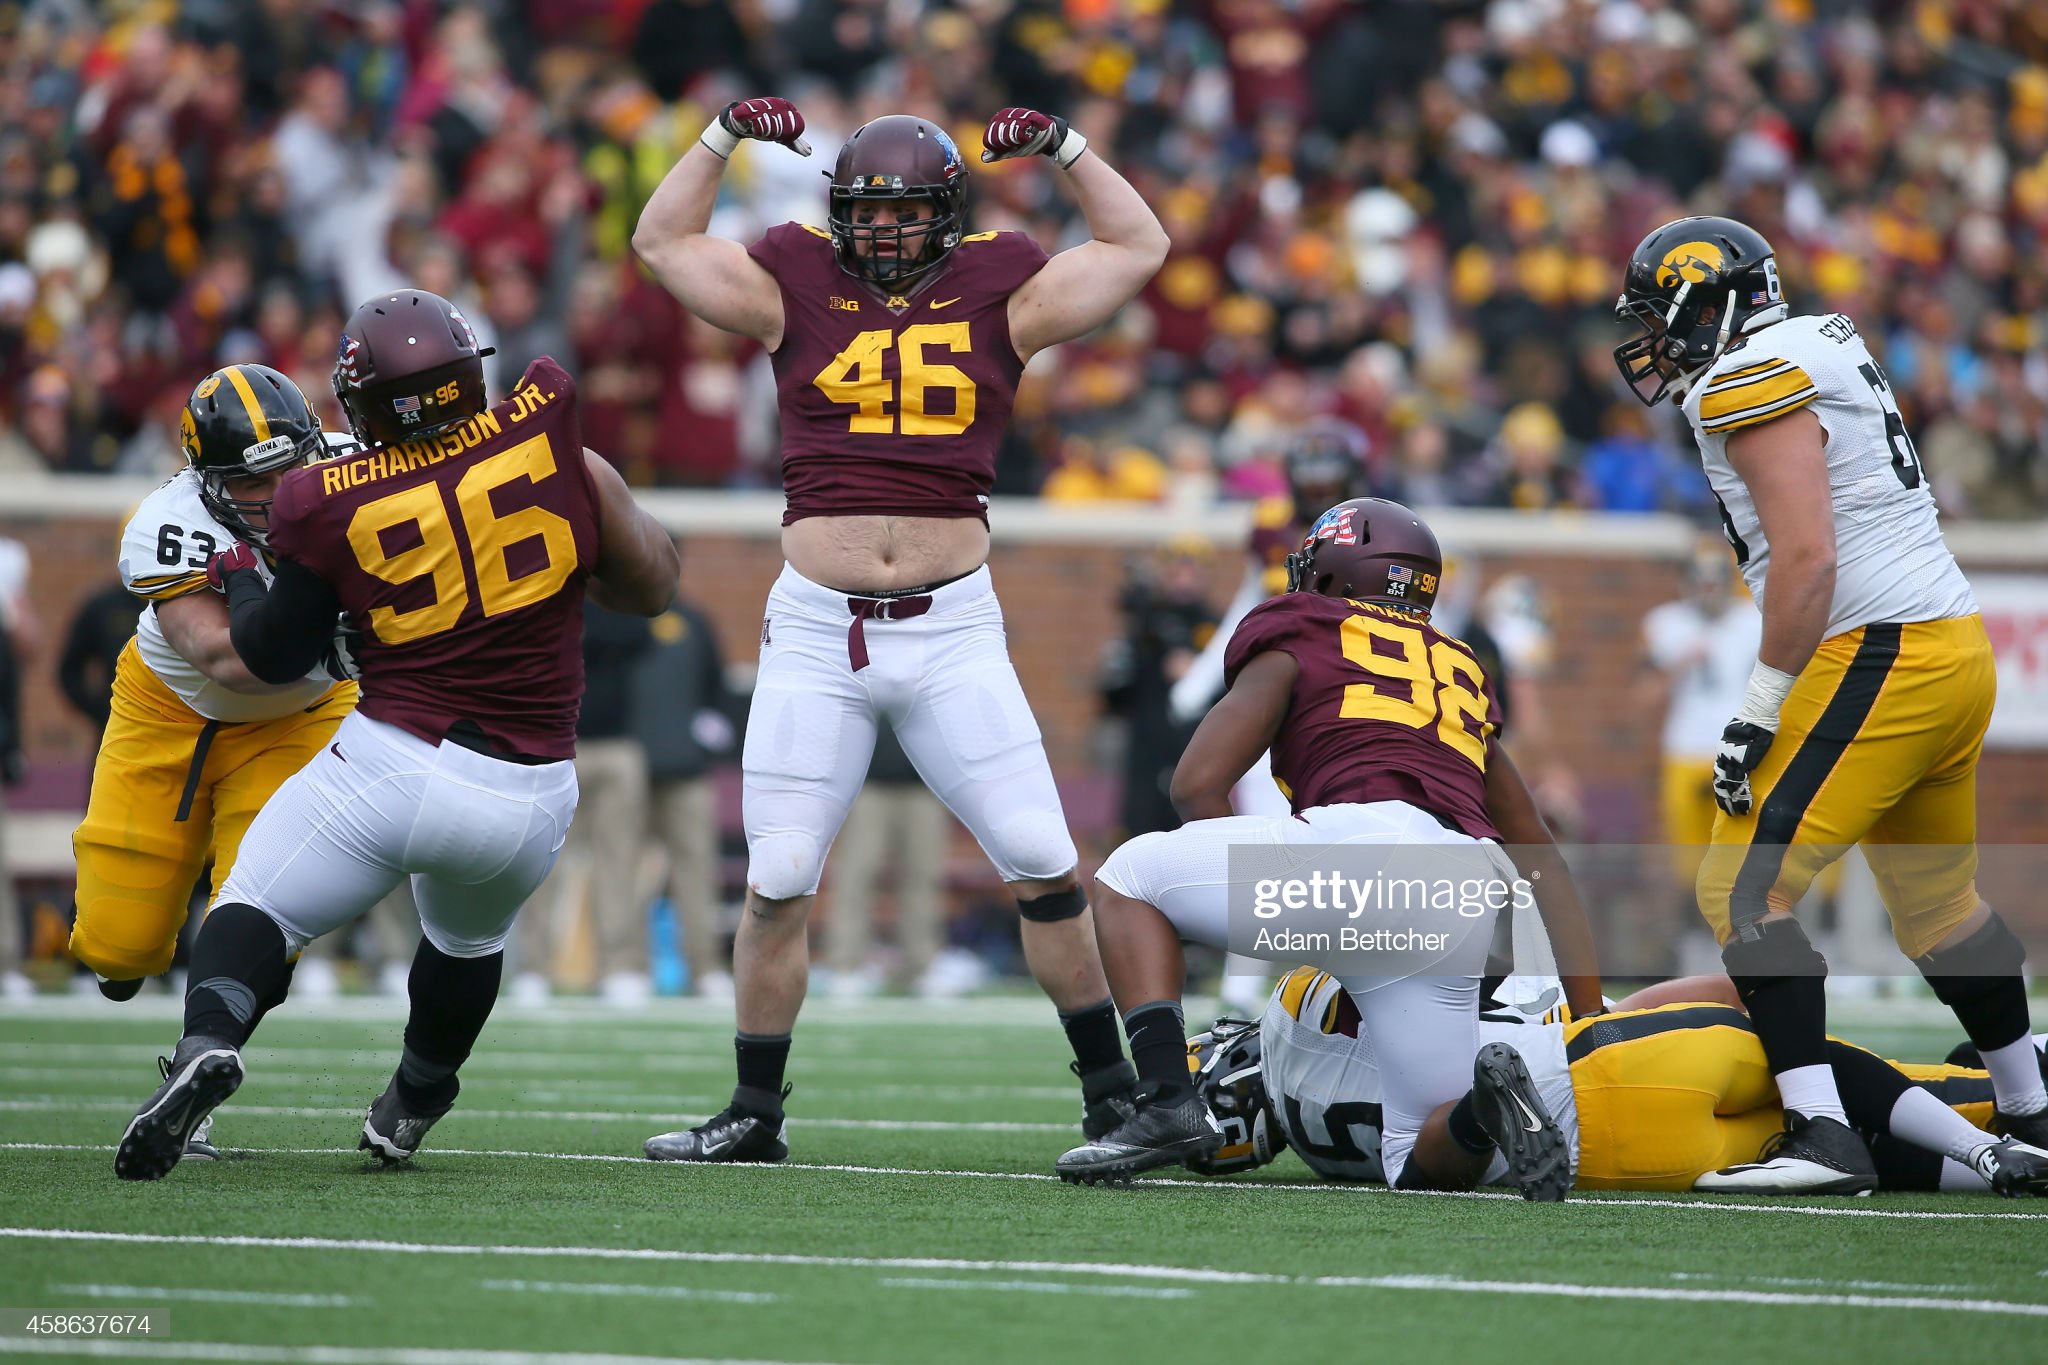 cameron-botticelli-of-the-minnesota-golden-gophers-celebrates-a-sack-picture-id458637674